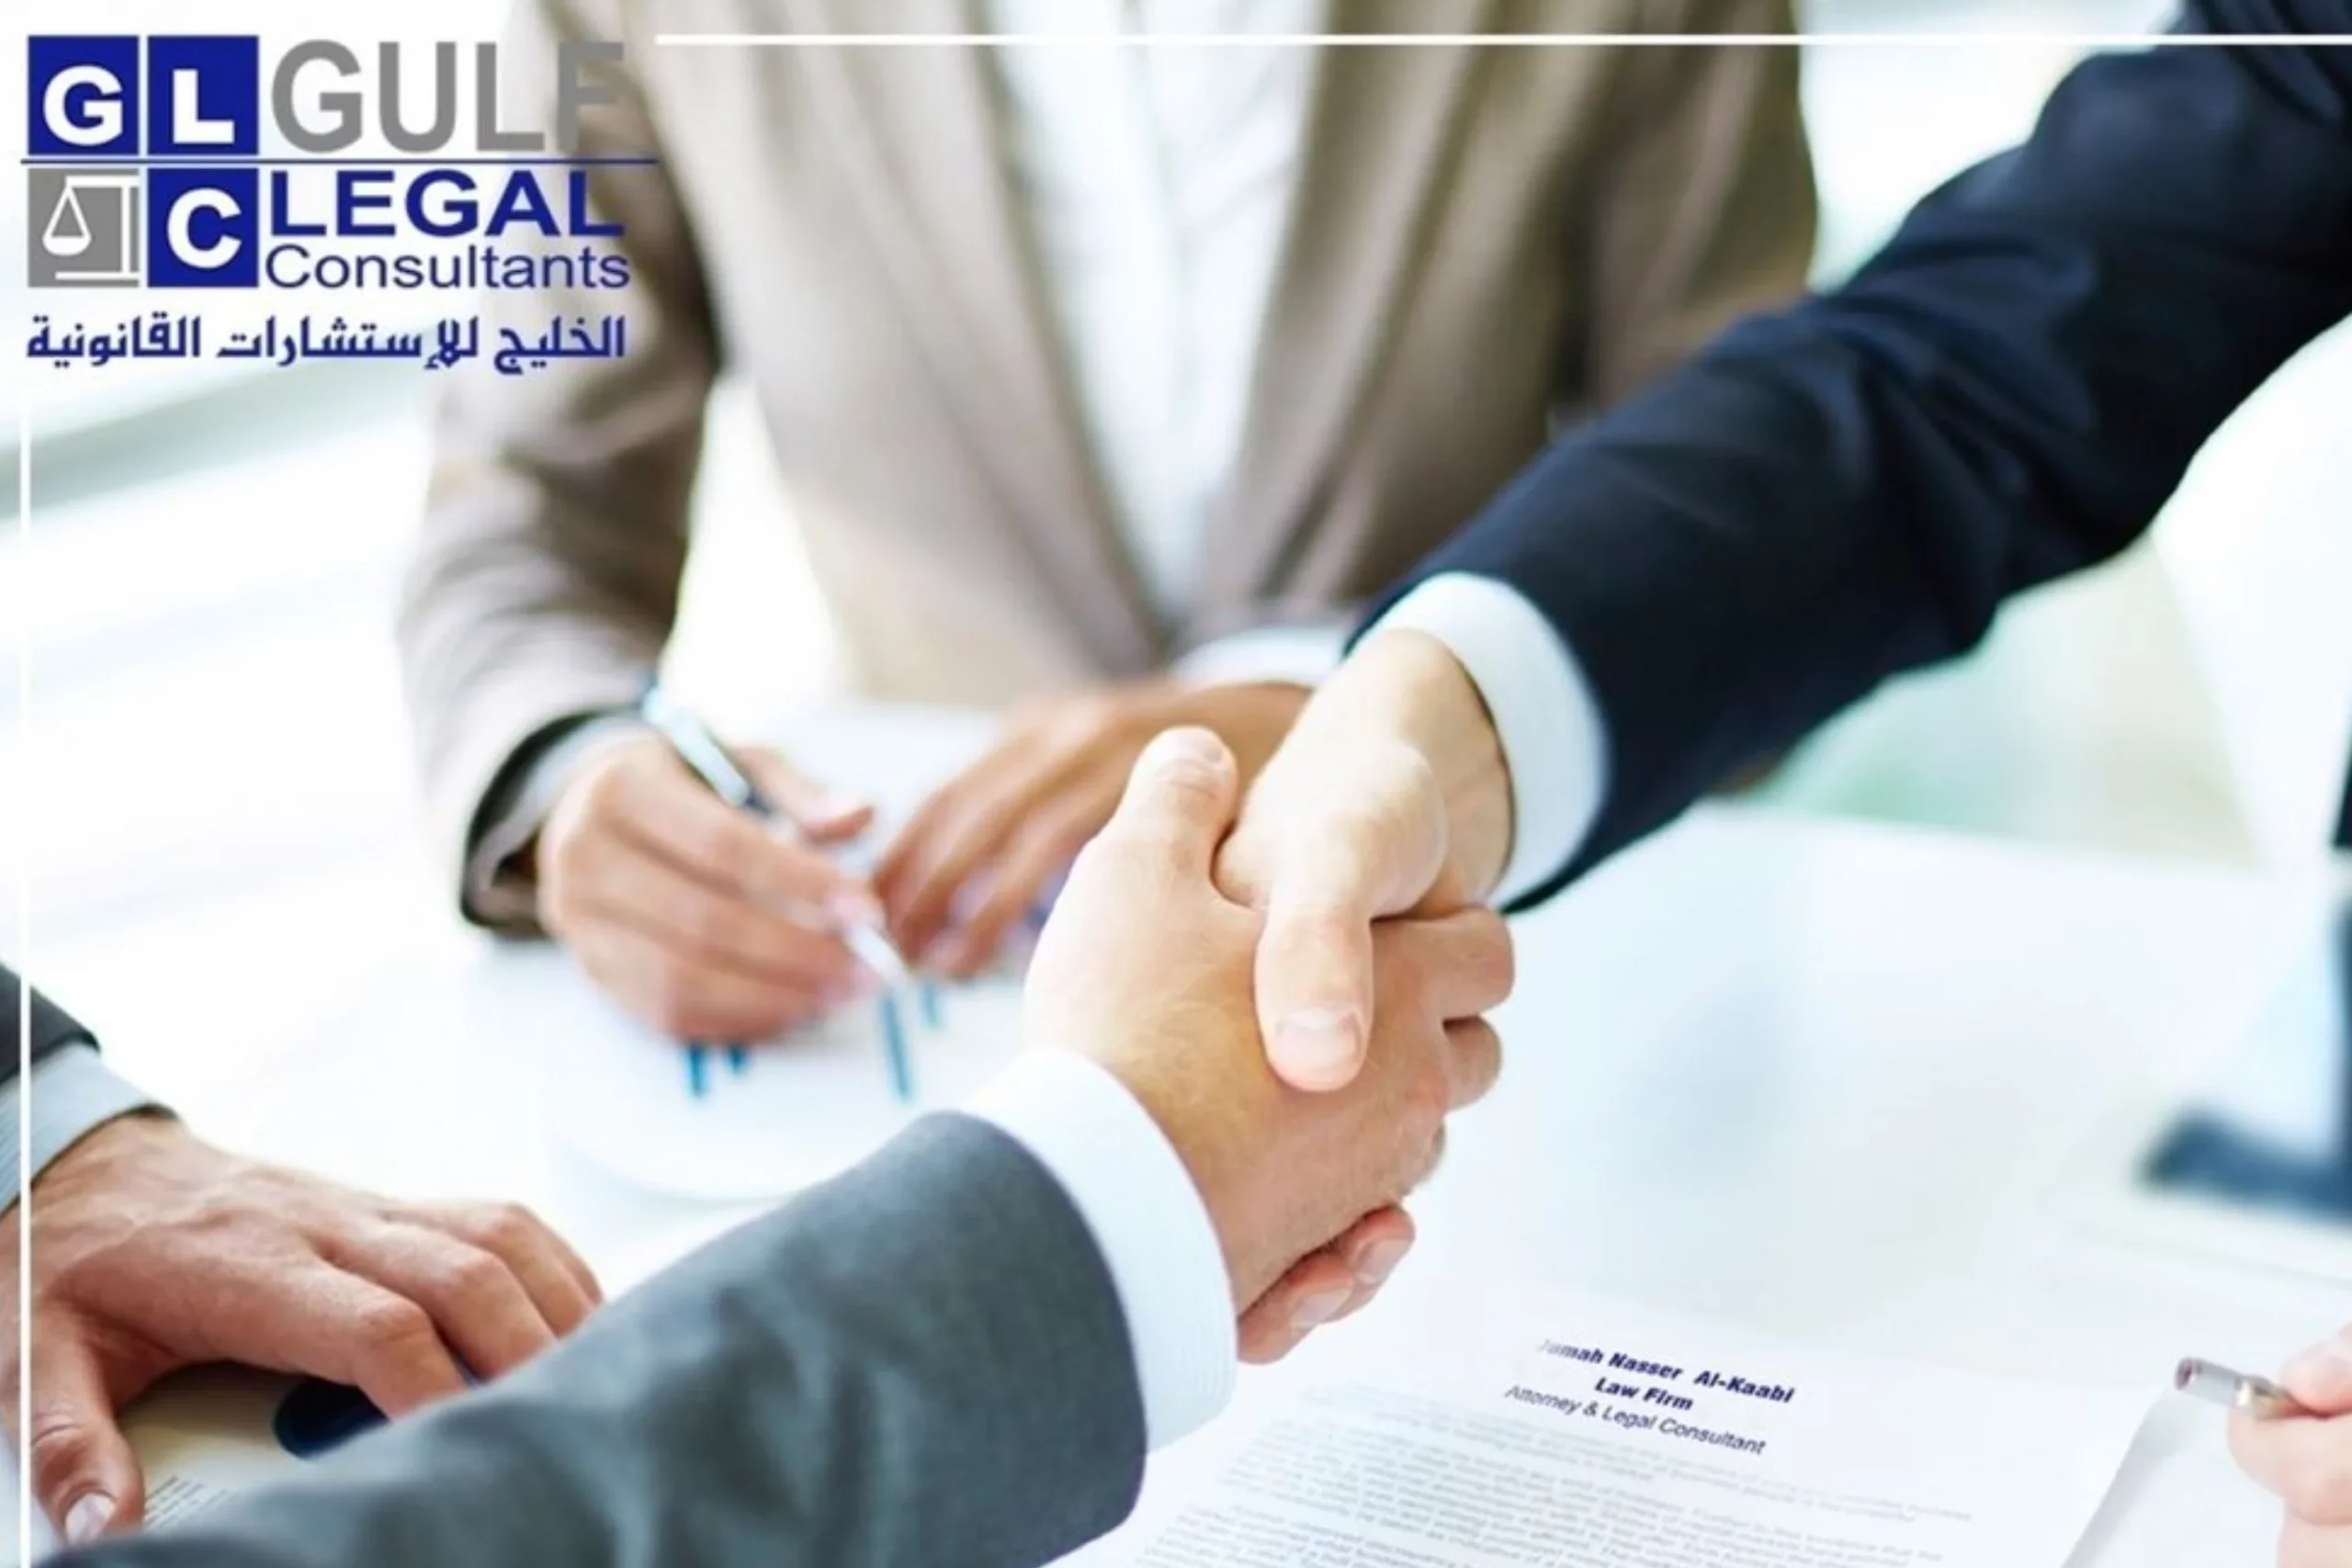 Gulf Legal Consultants